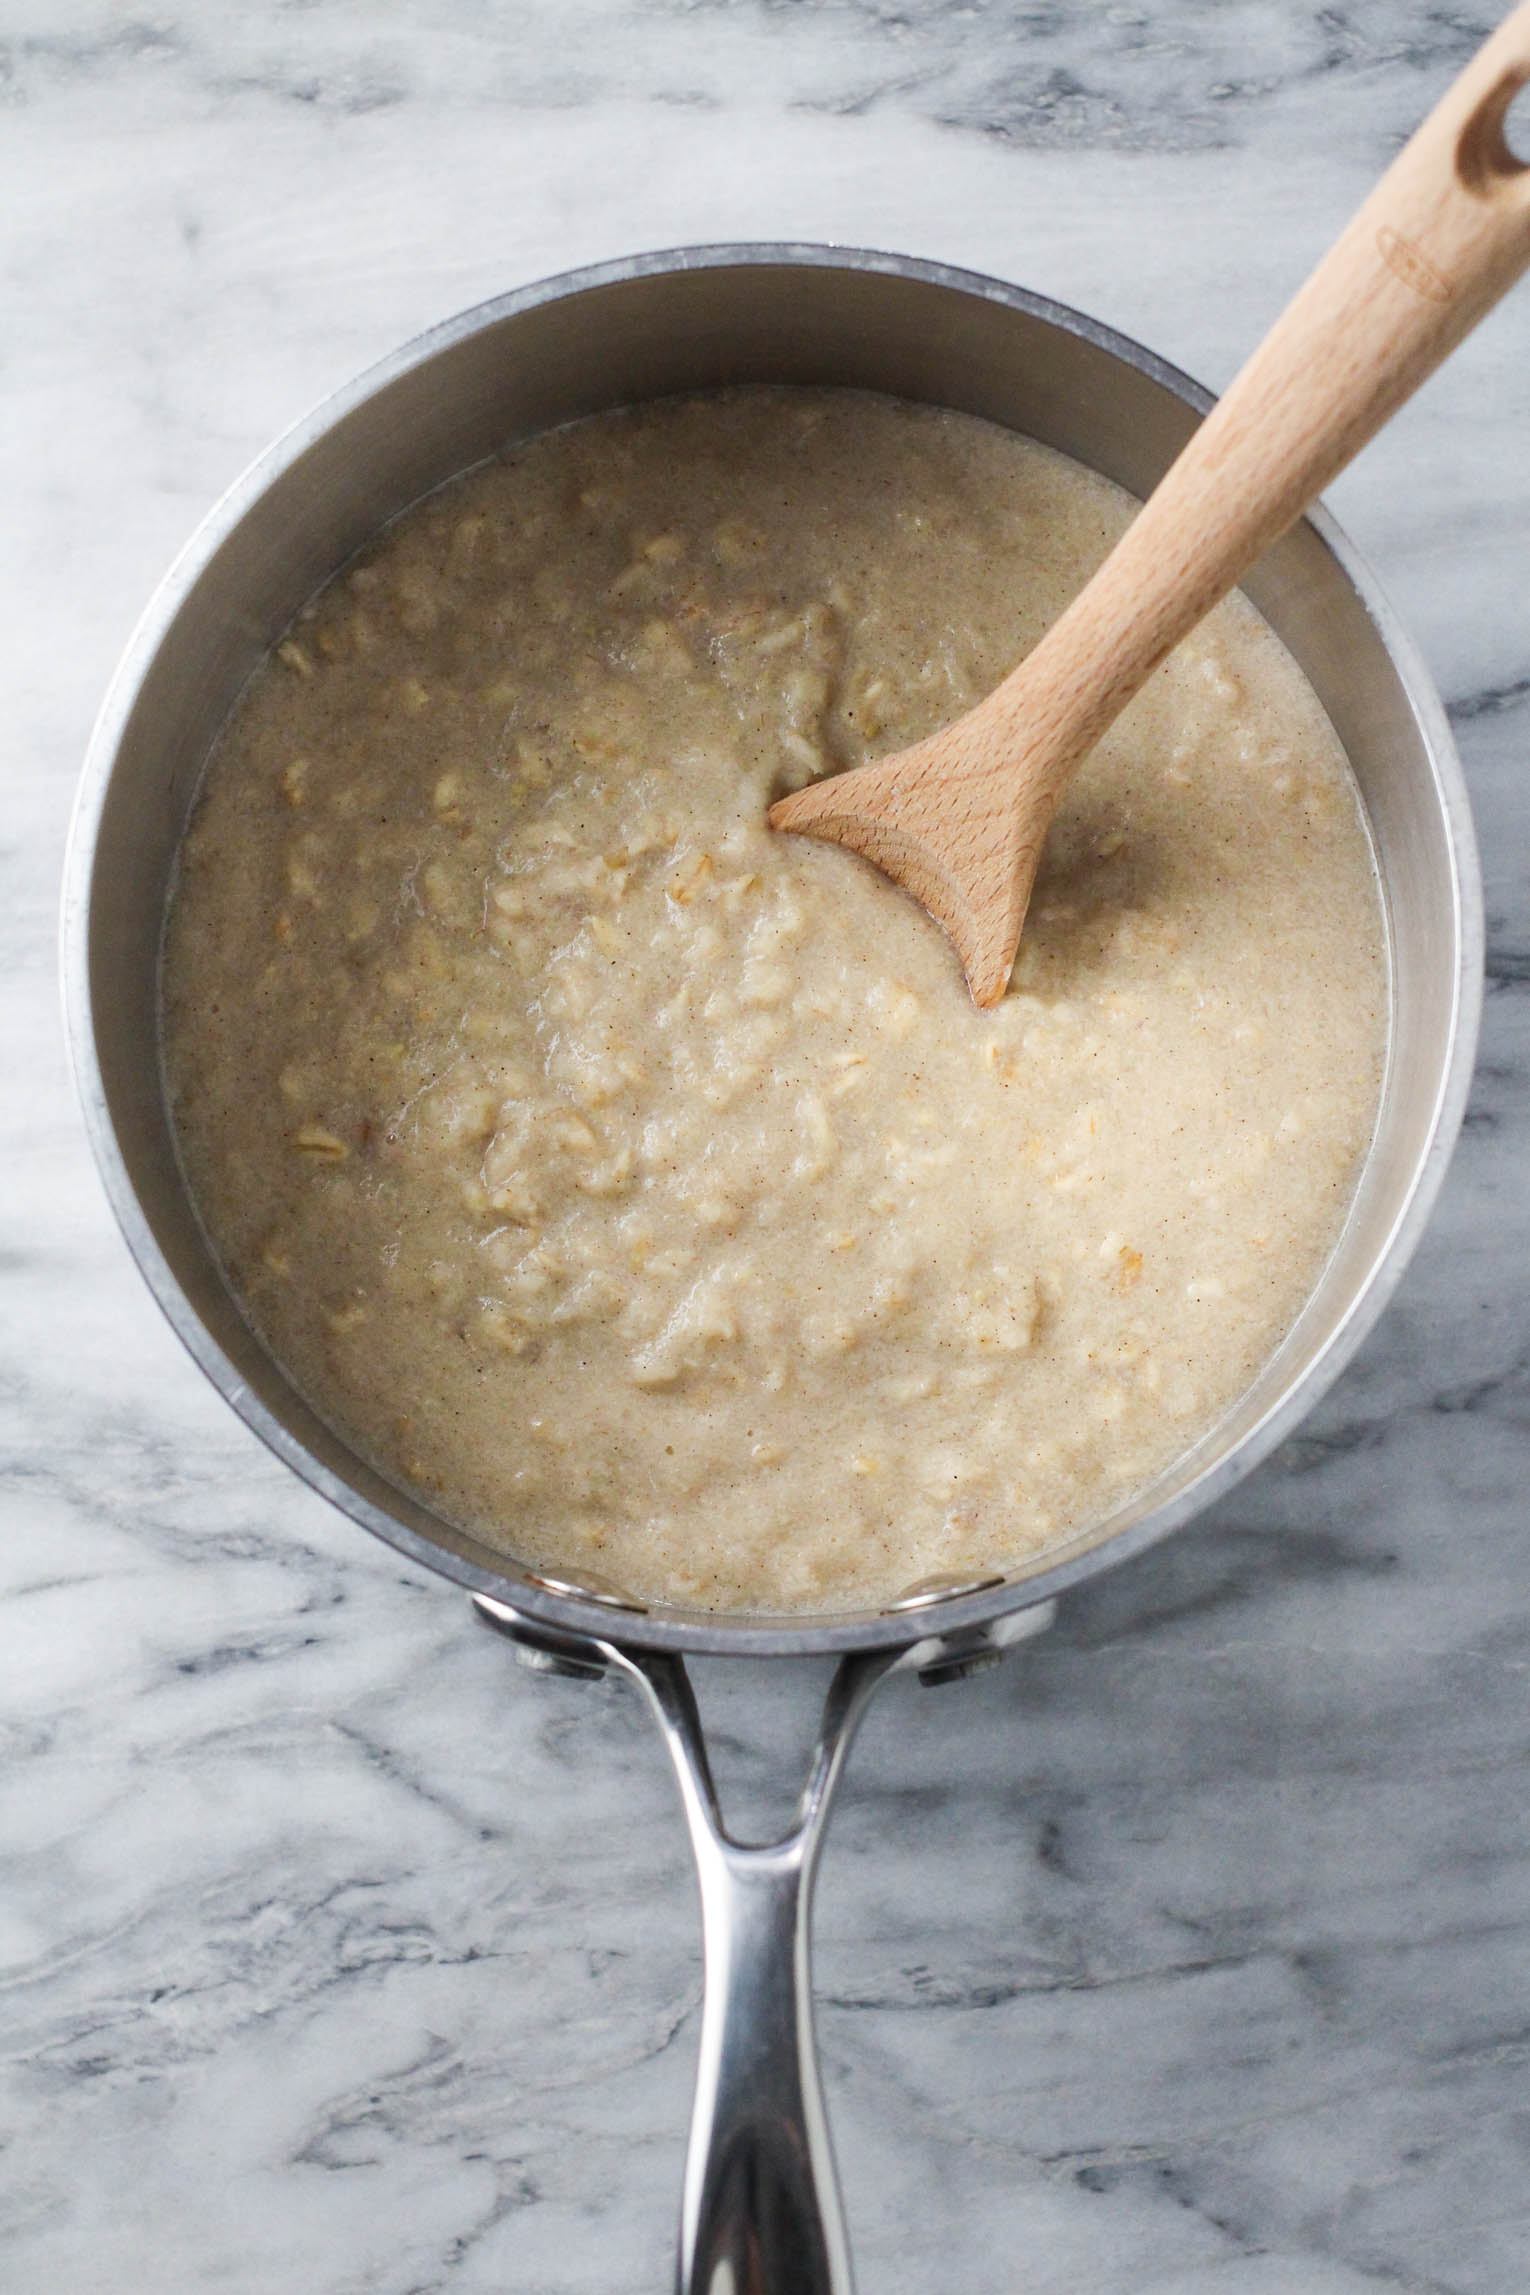 Overhead shot of oatmeal in a saucepan standing on a marble background. A wooden spoon is in the oatmeal.